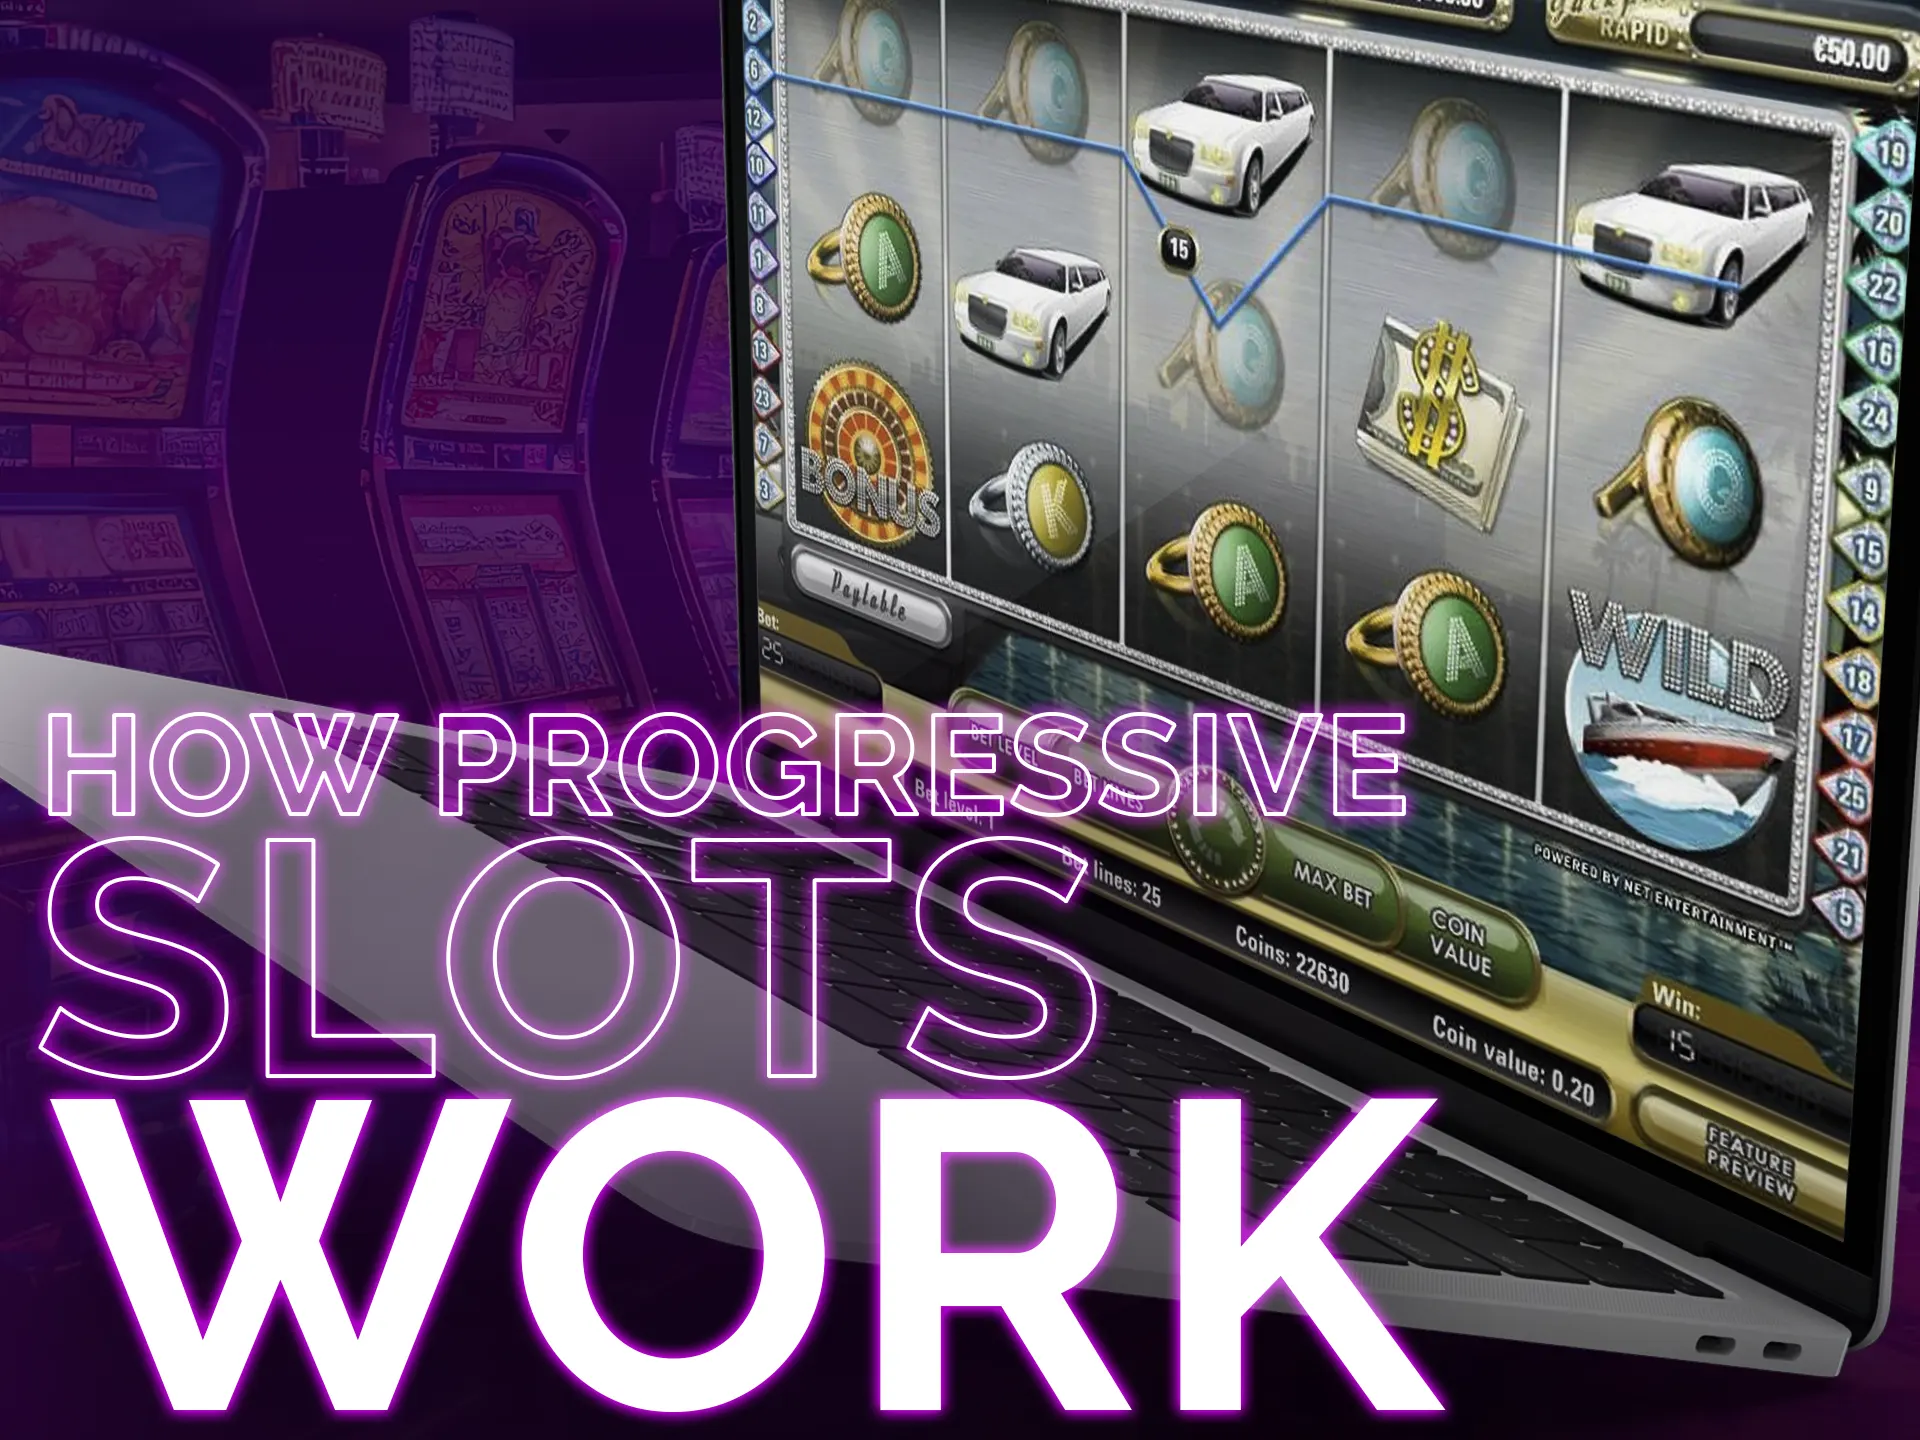 Read the rules before playing progressive jackpot slots because game conditions may vary from casino to casino.